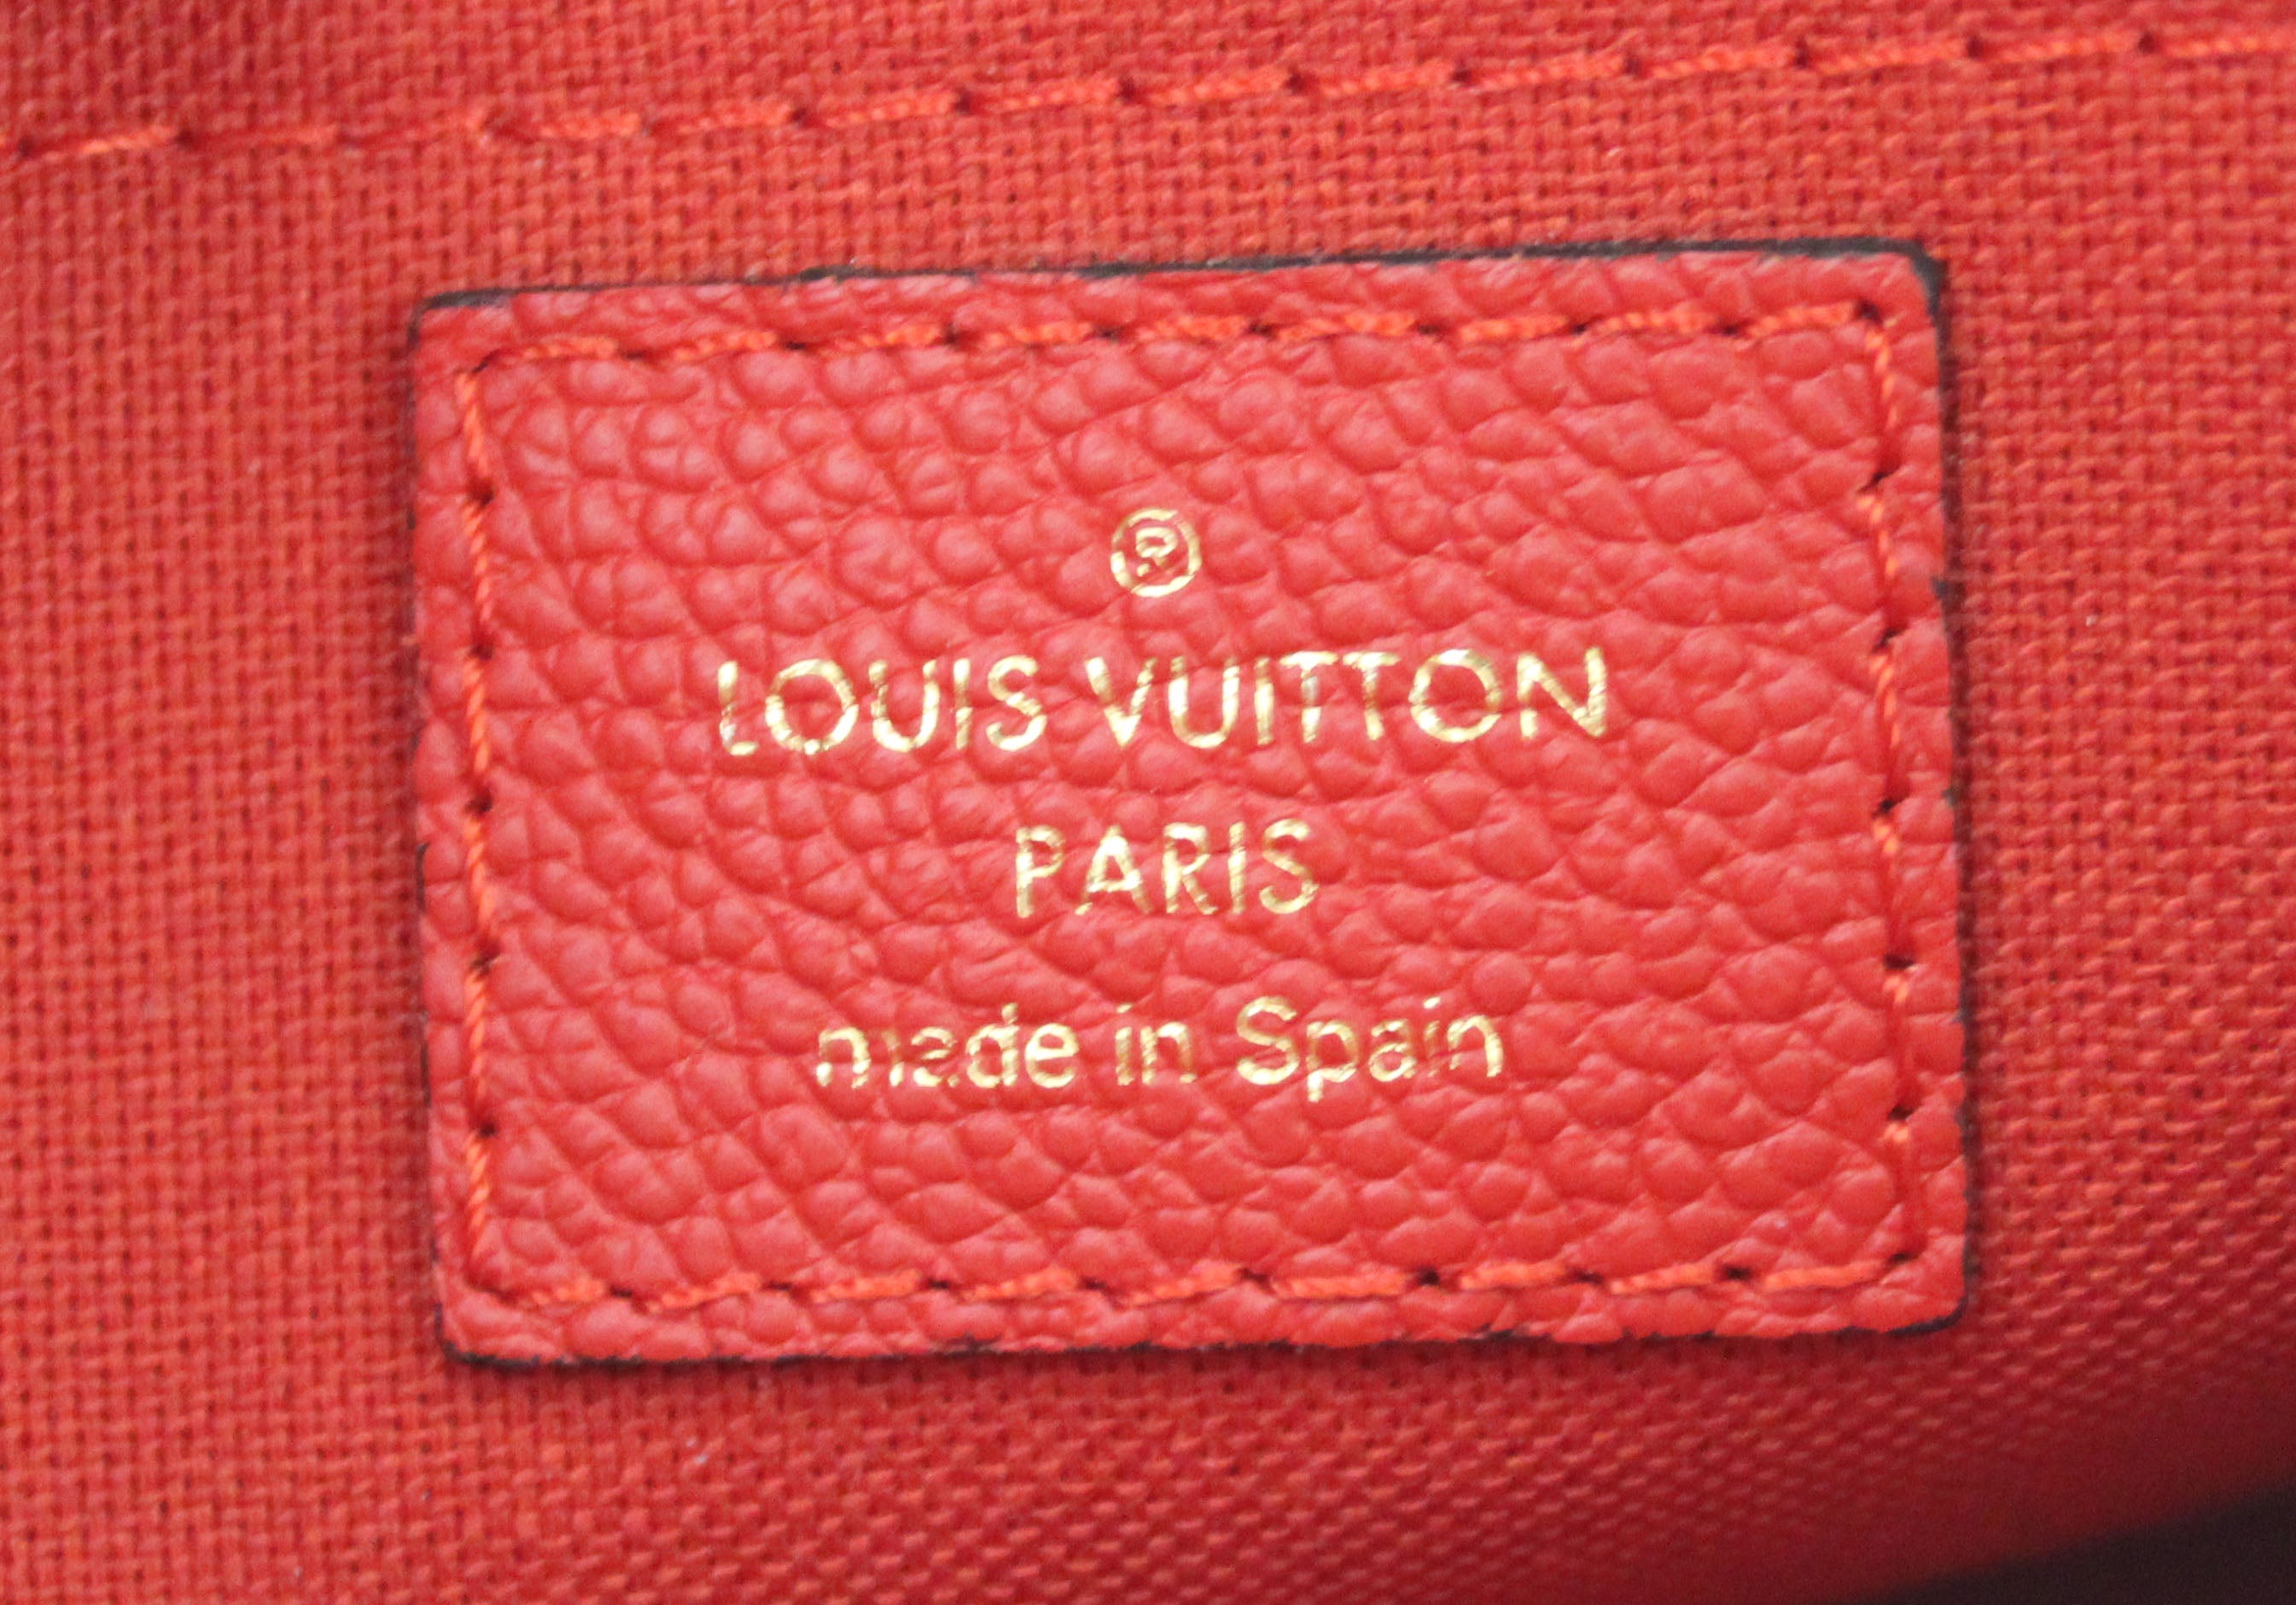 Authentic Louis Vuitton Classic Monogram and Red Calfskin Leather